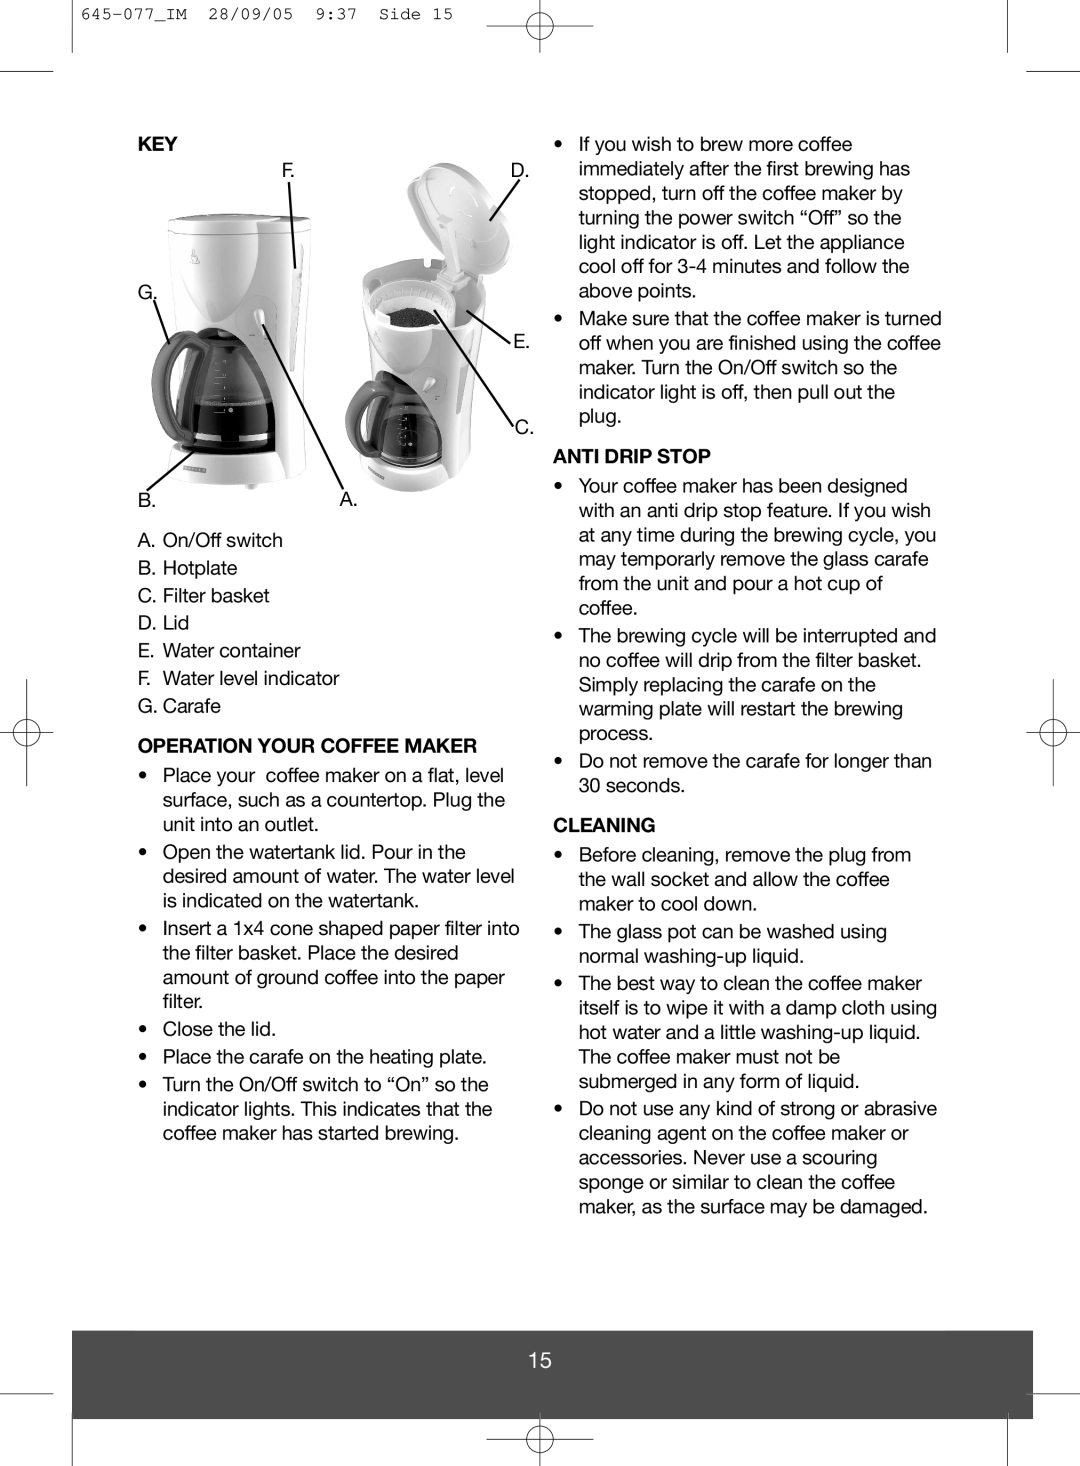 Melissa 645-077 manual Anti Drip Stop, Operation Your Coffee Maker, Cleaning 